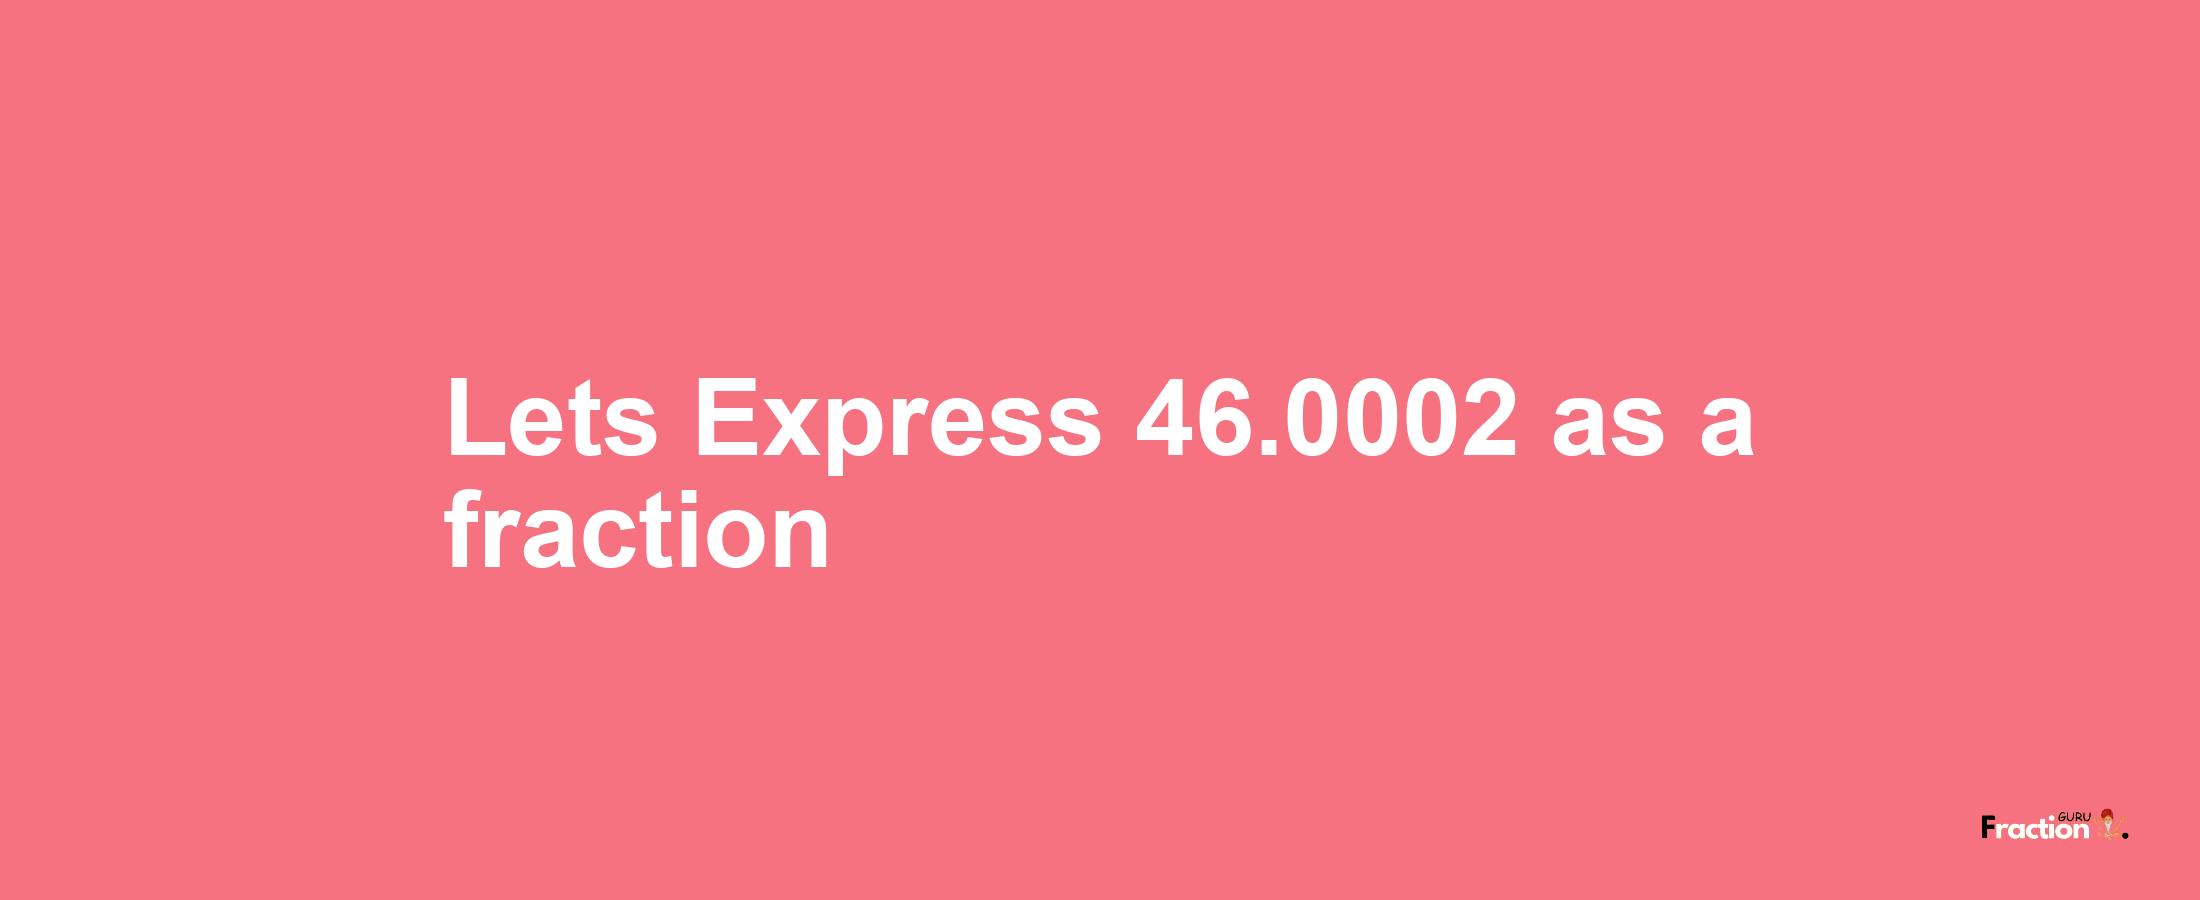 Lets Express 46.0002 as afraction